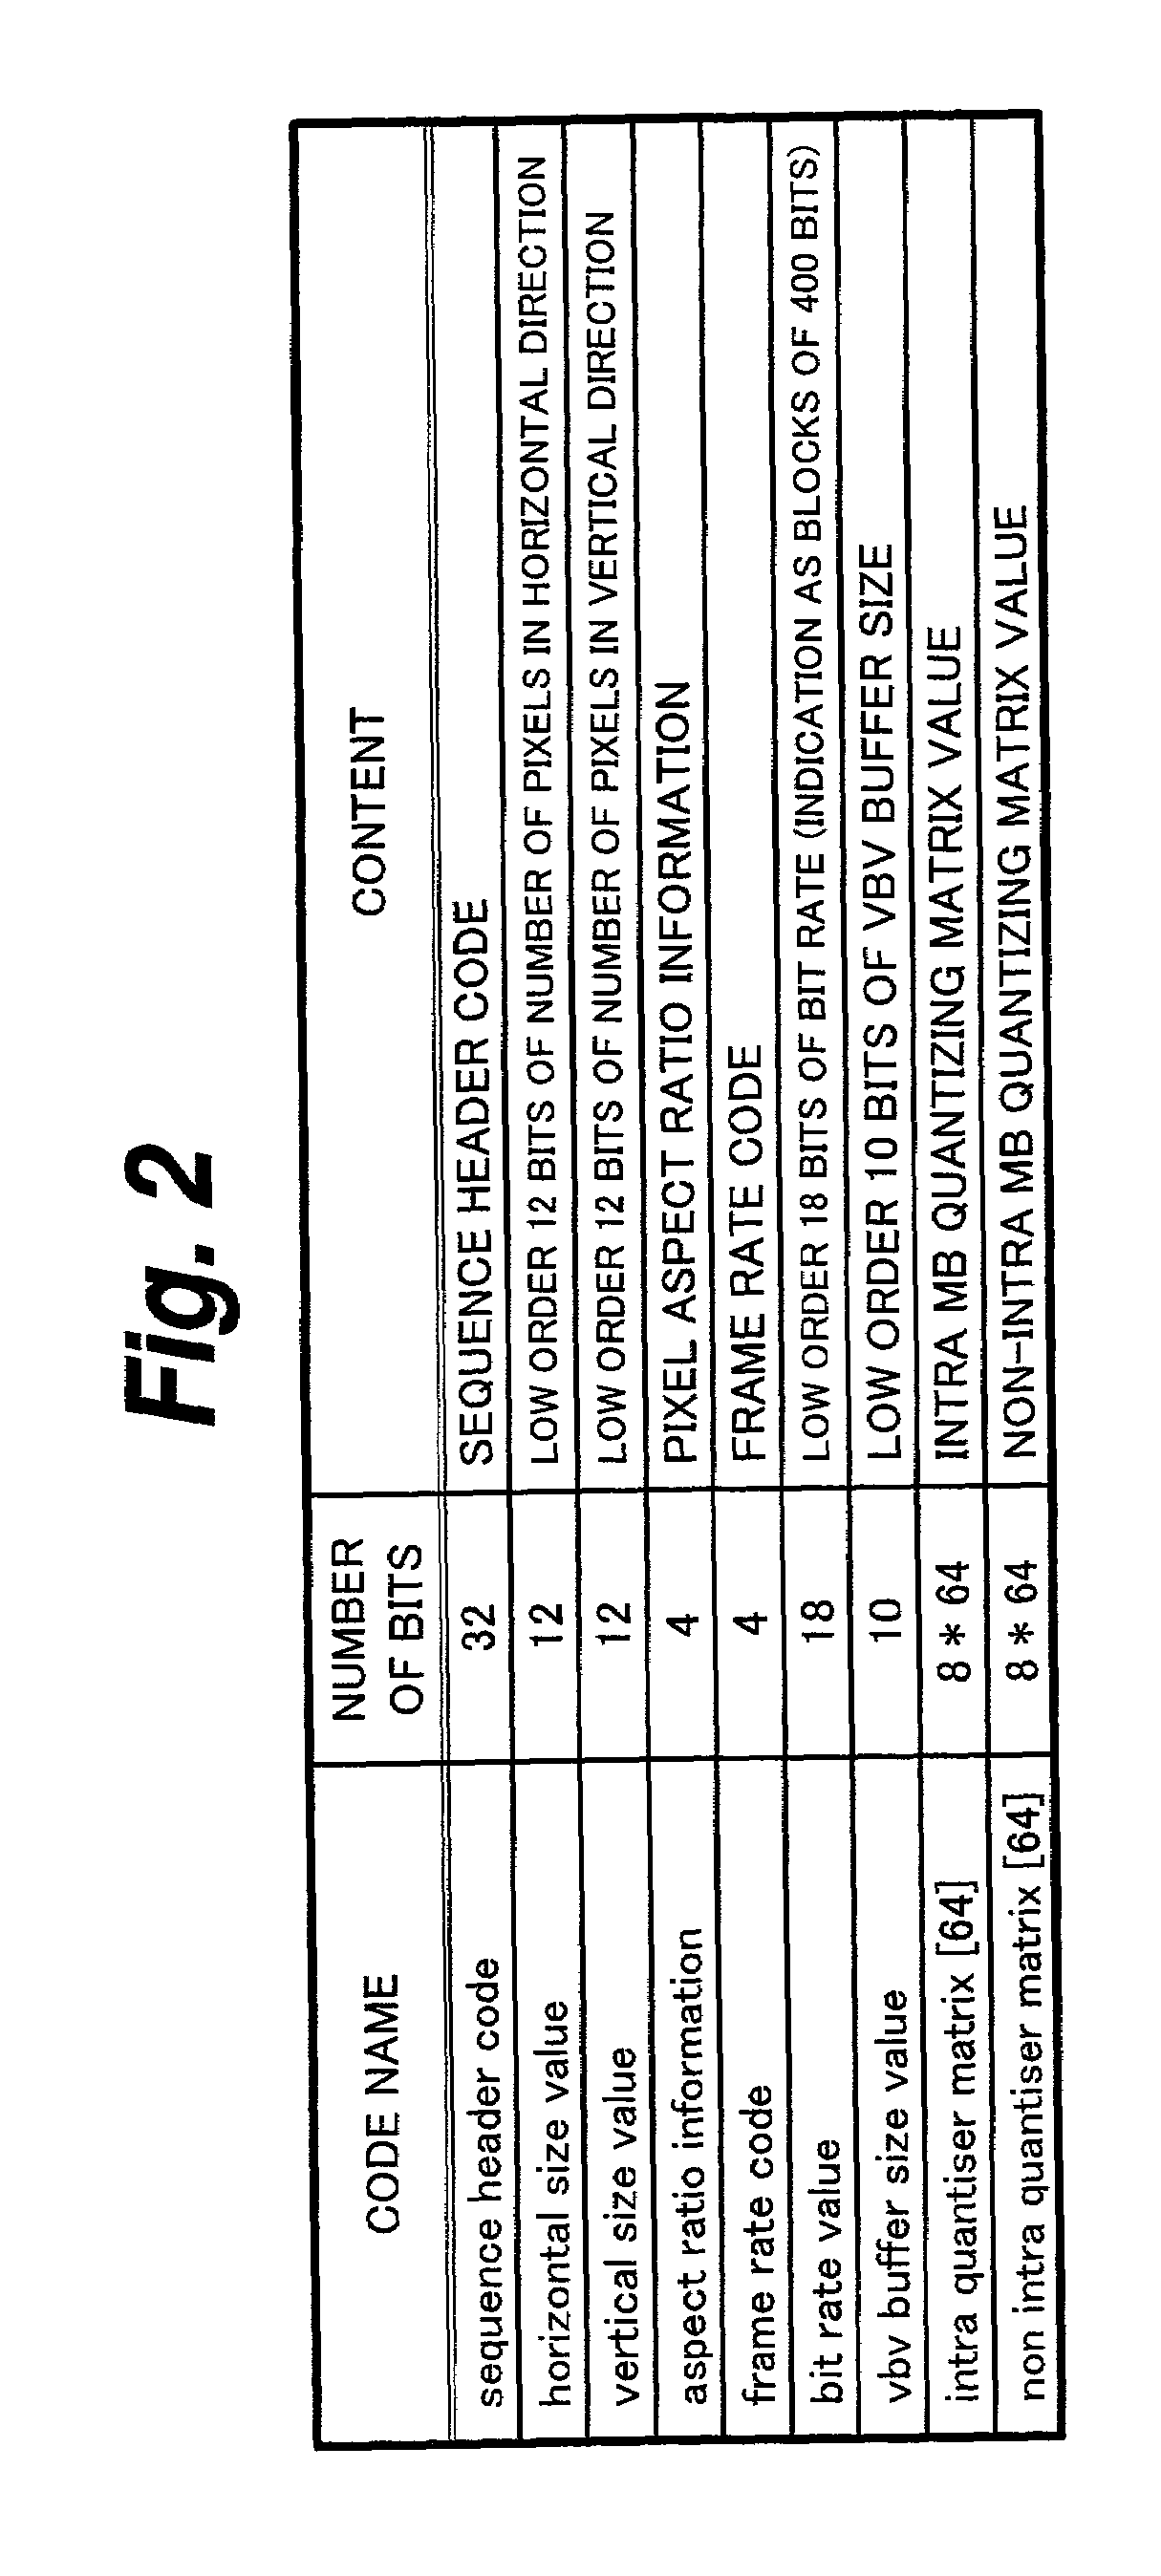 Recording apparatus and method, and reproducing apparatus and method